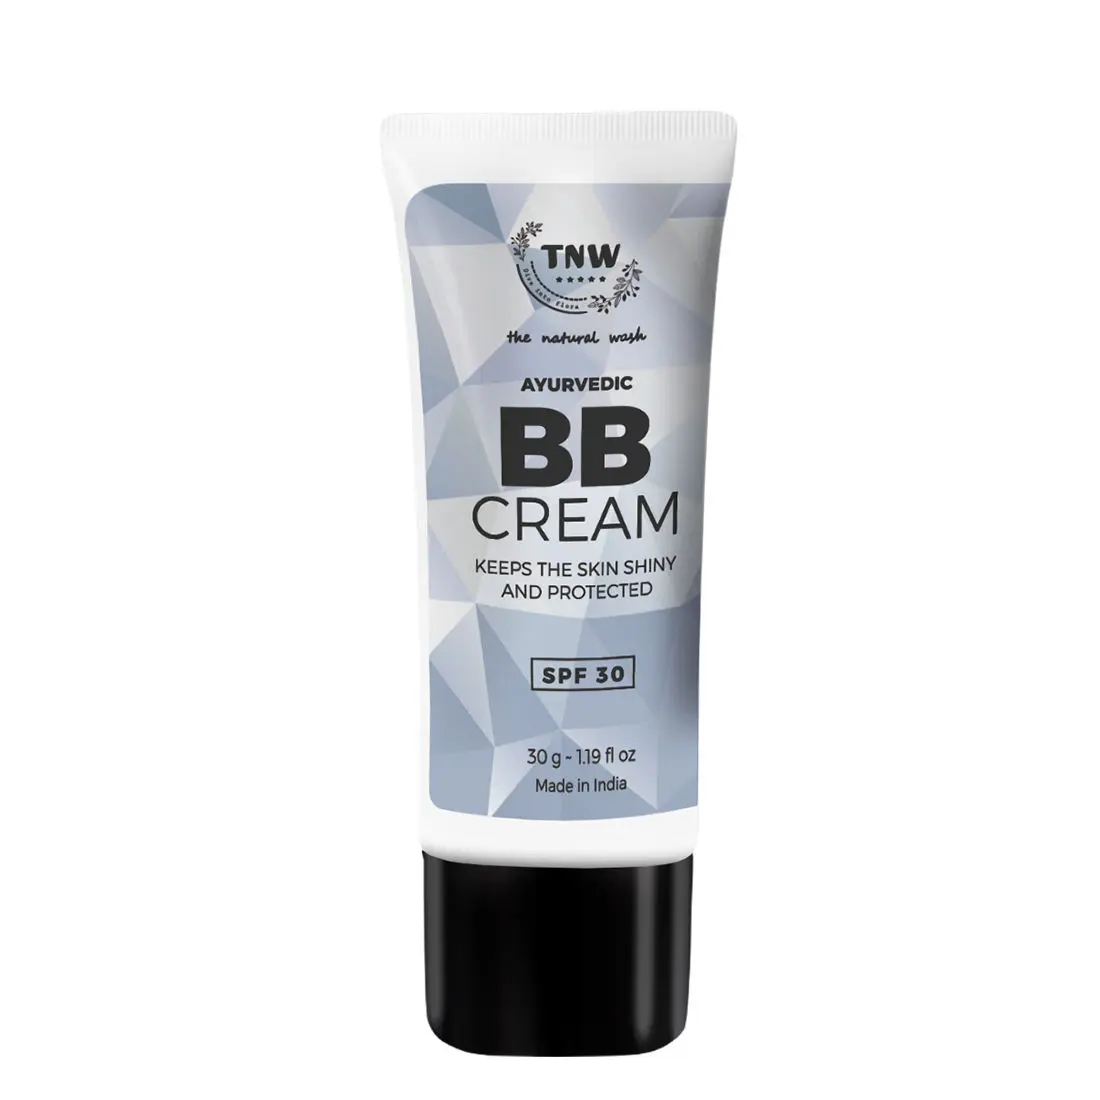 TNW - The Natural Wash BB Cream With Spf 30 For Get Smooth Coverage & Protected Skin (30 g)